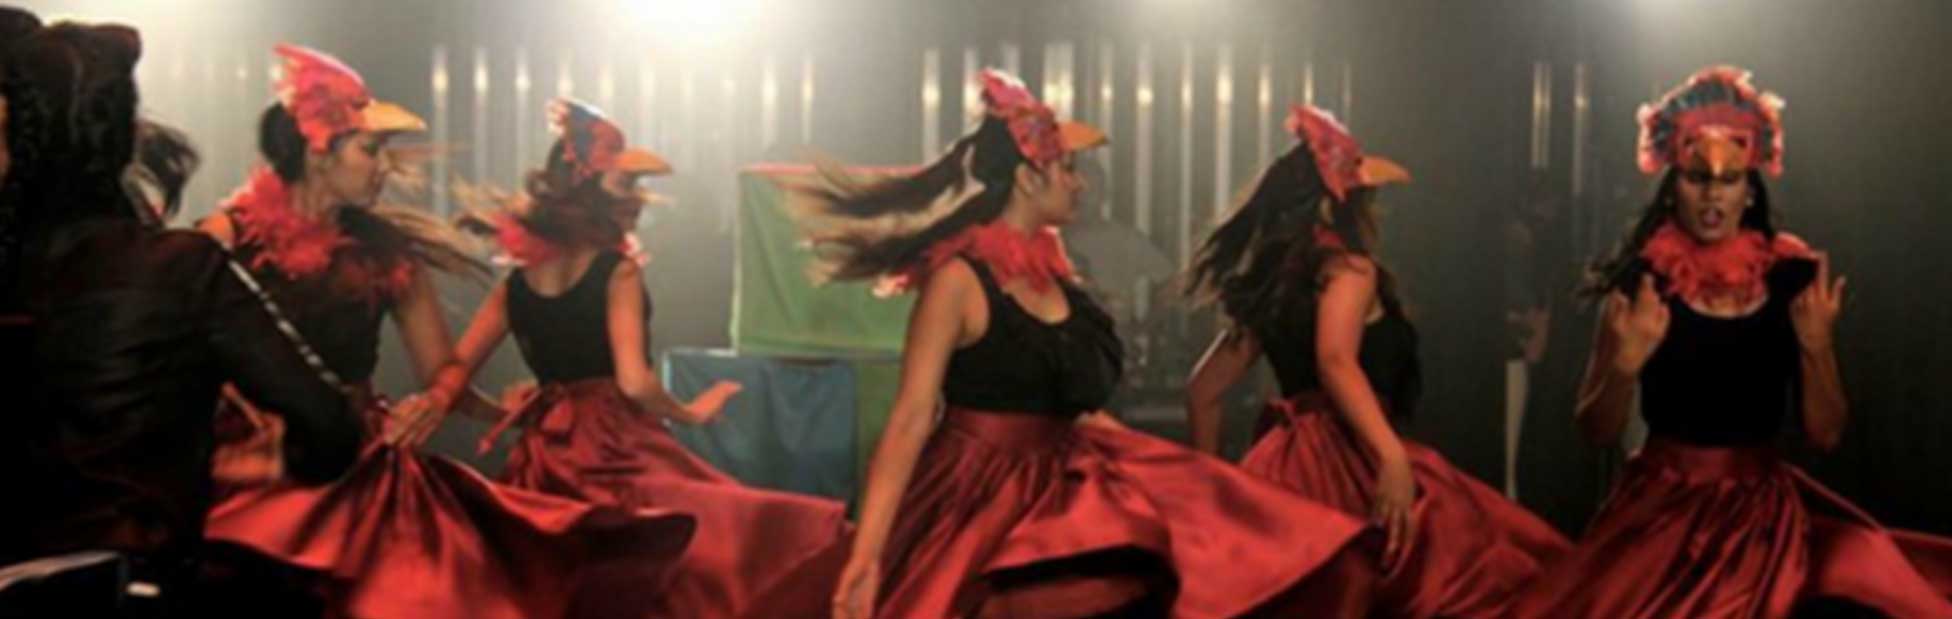 Women in large skirts spinning on stage